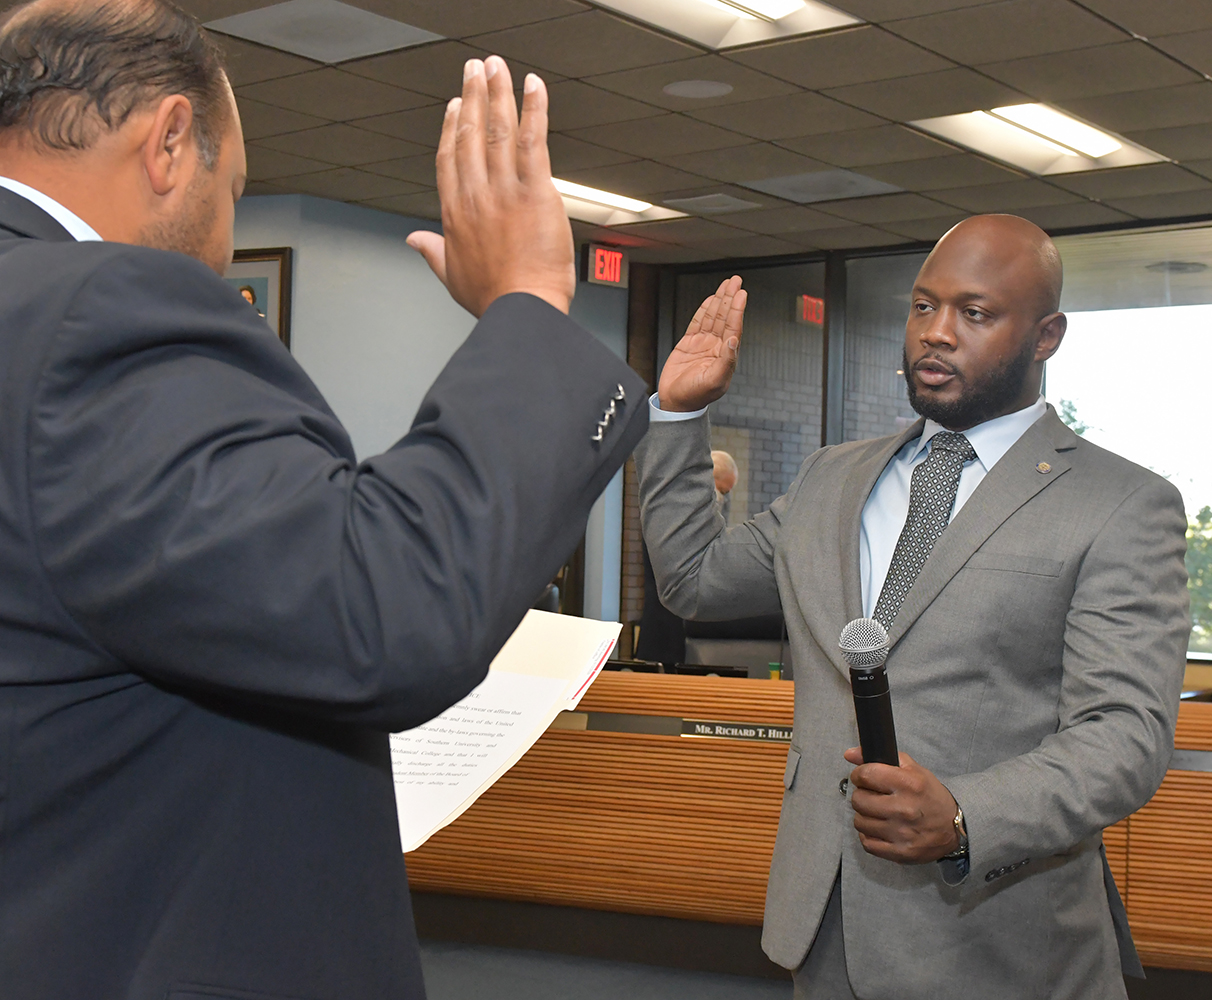 Brandon Decuir, Board counsel, administers the oath to Garvey.